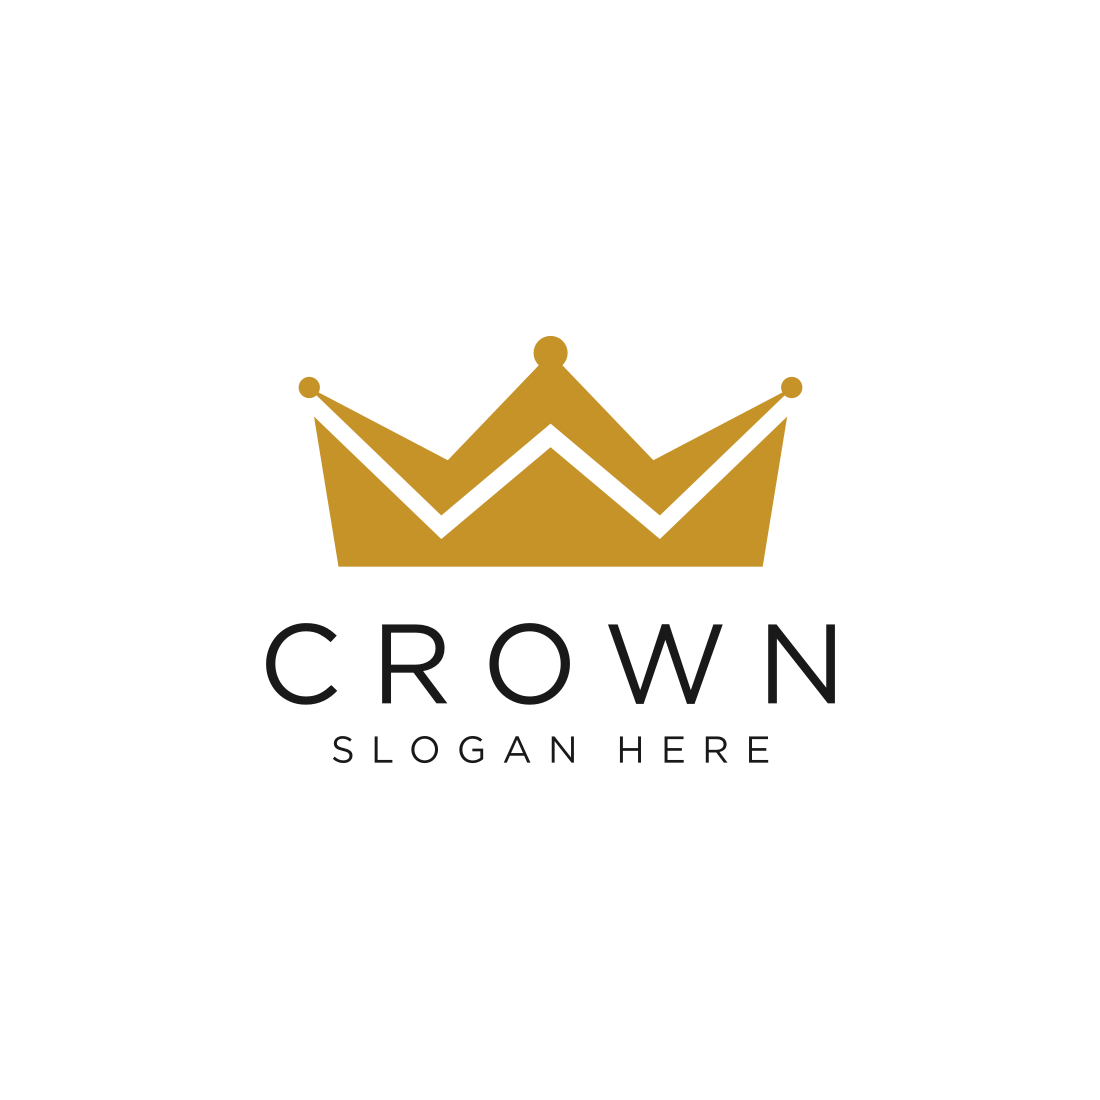 Crown logo with a white background.